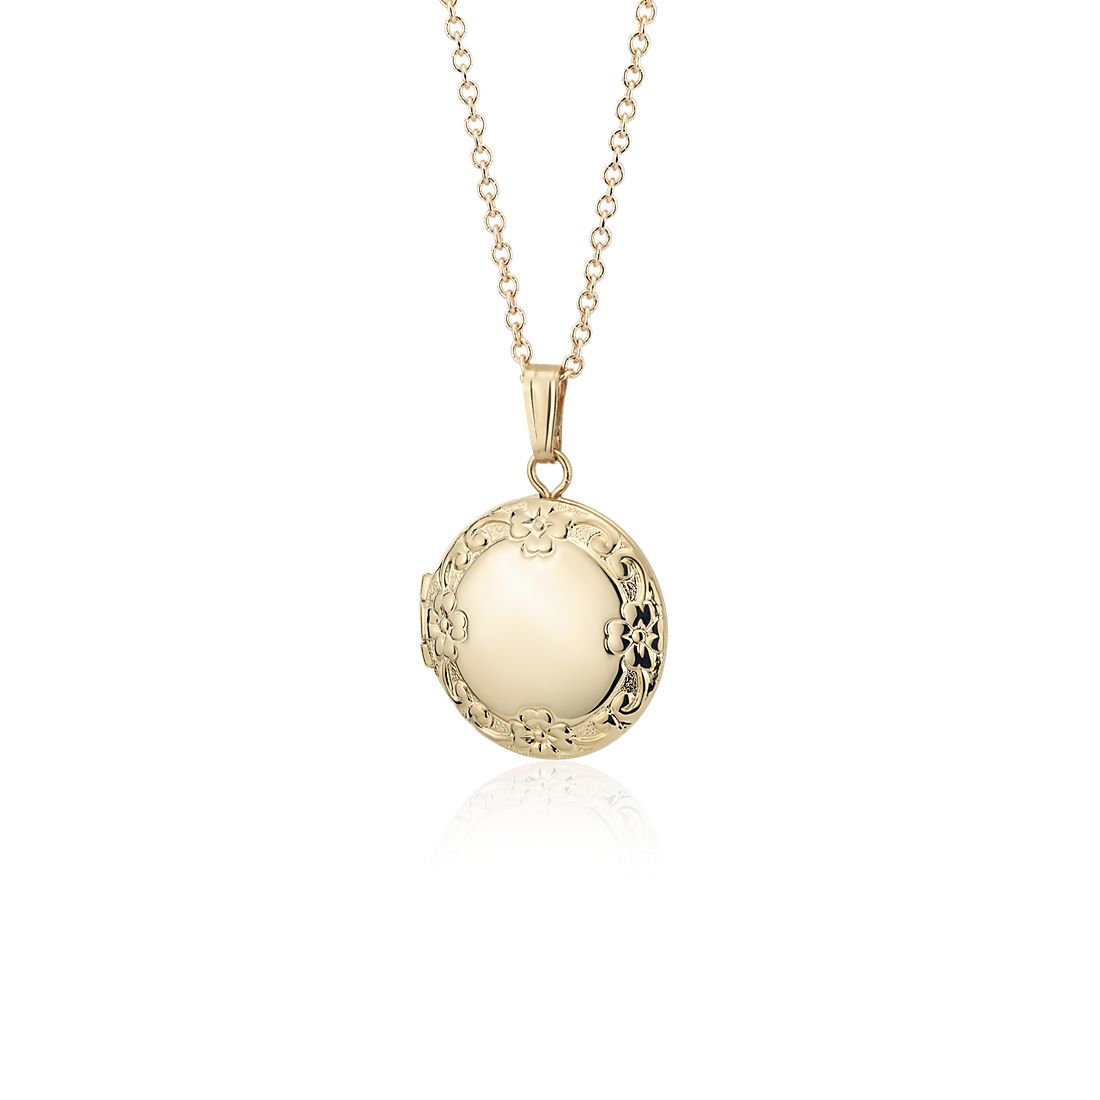 Petite Round Floral Locket in 14k Yellow Gold